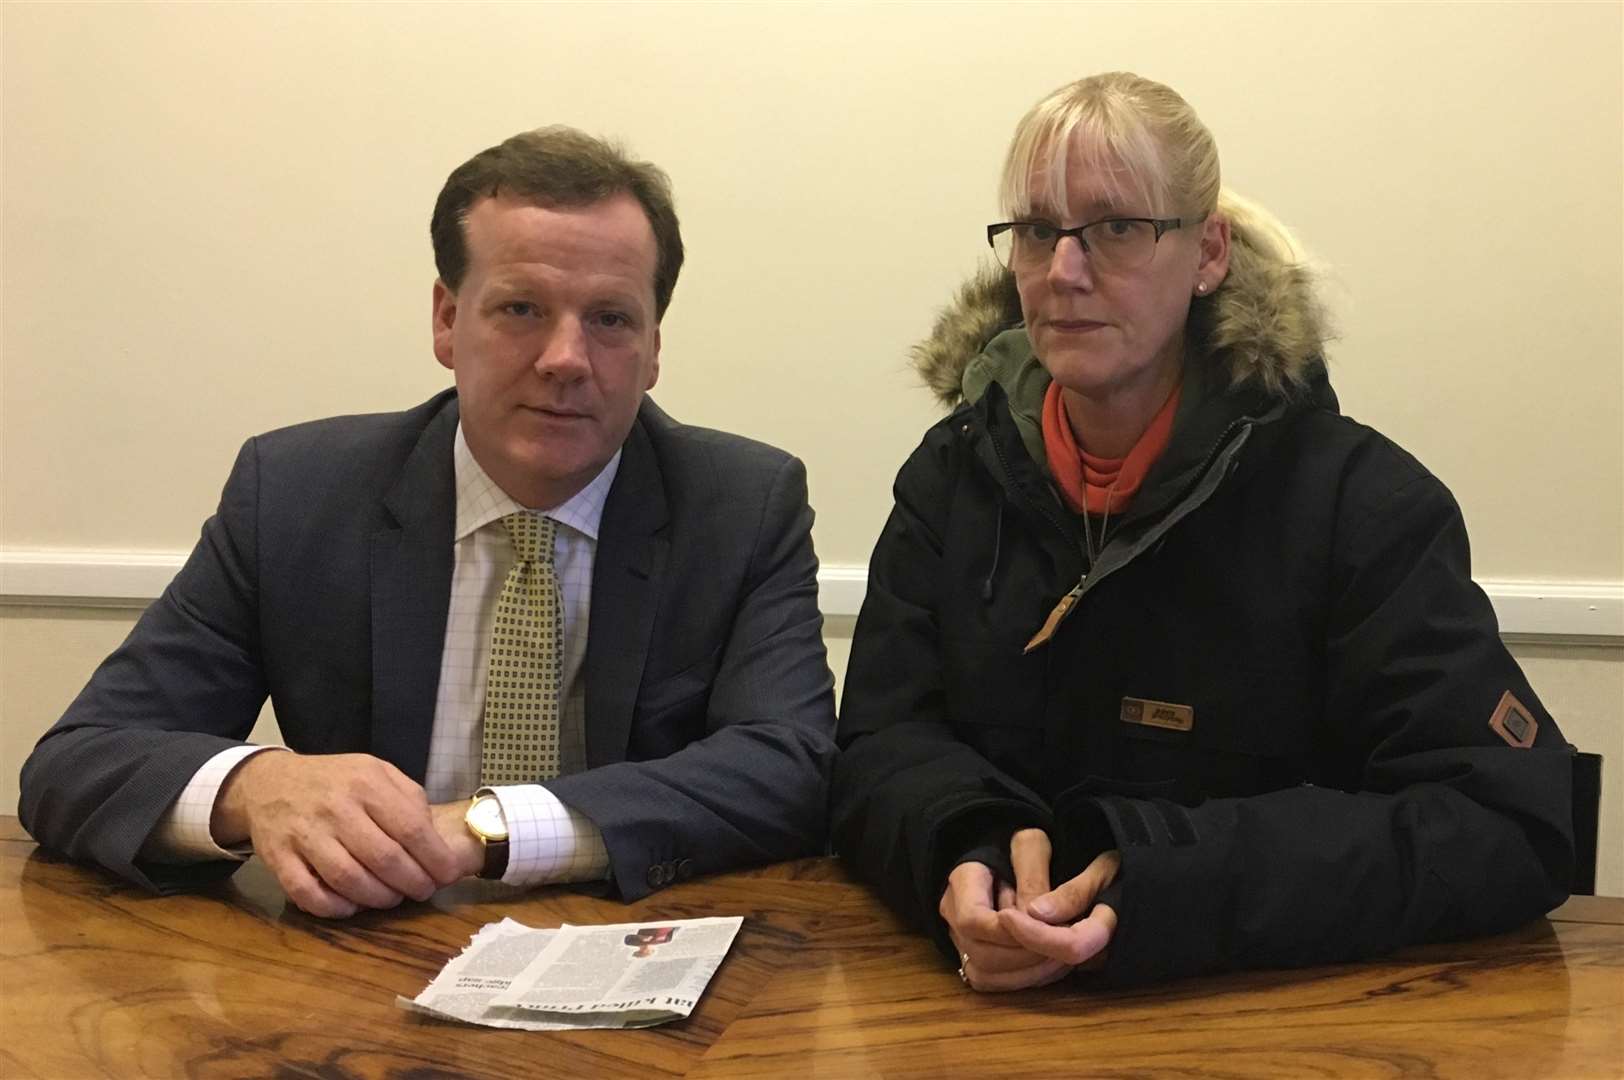 Charlie Elphicke and Michelle Fraser have been working together to bring in Robert's Law